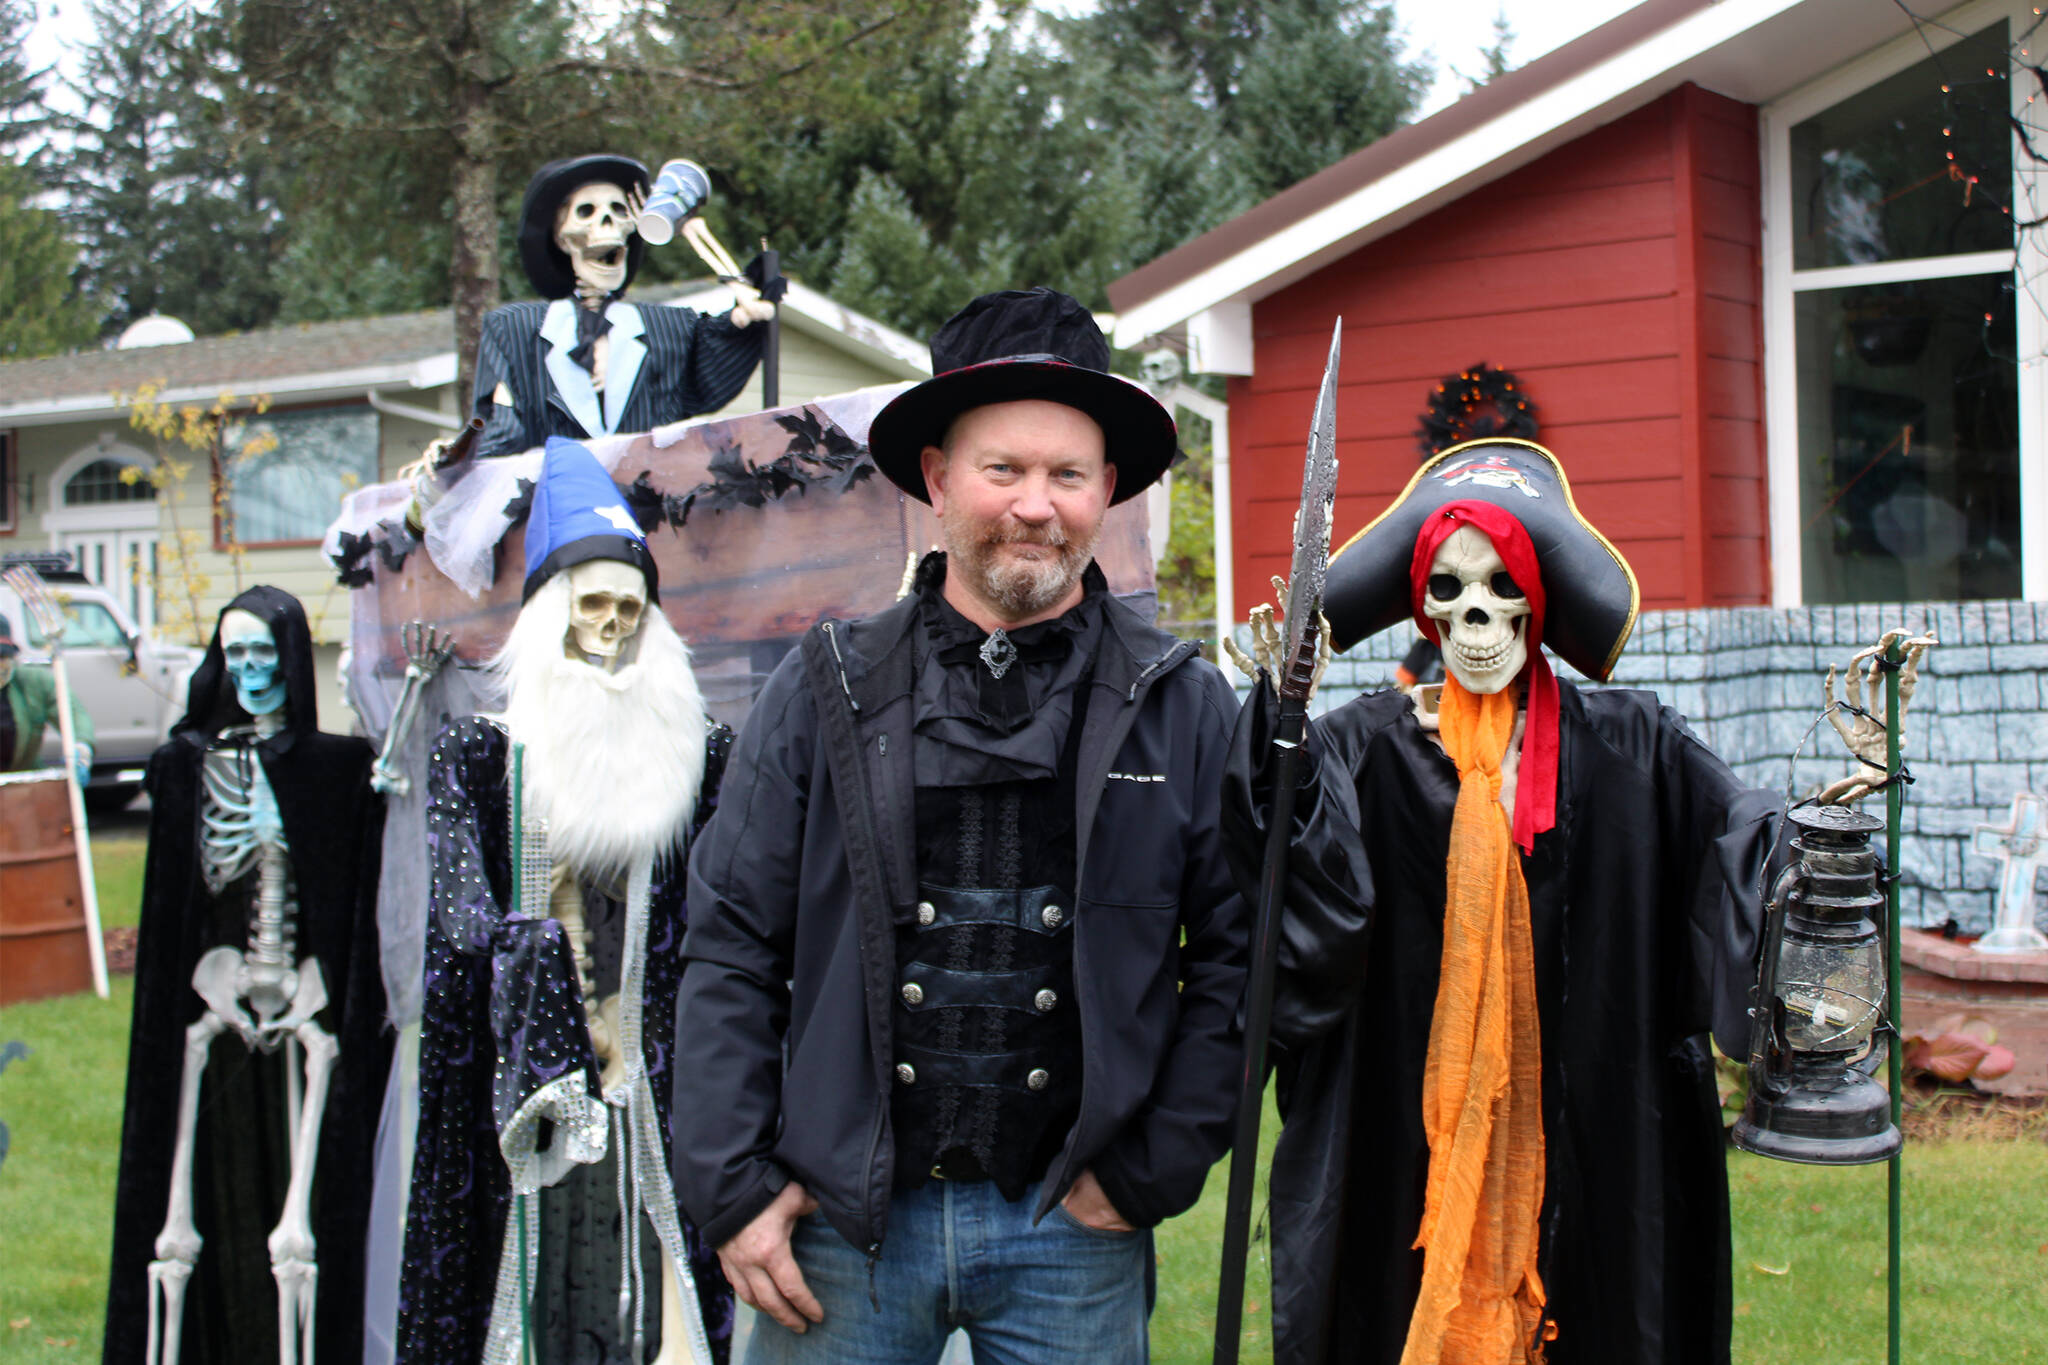 On Oct. 26, Dan Earls stands among some of the ghosts and ghouls that greet people who visit the haunted garage he constructs at his home each year. Earls, who lives at 9420 Berners Ave., welcomes hundreds of people a season to his display, which winds through his garage and spreads onto a neighbor's yard. (Dana Zigmund/Juneau Empire)